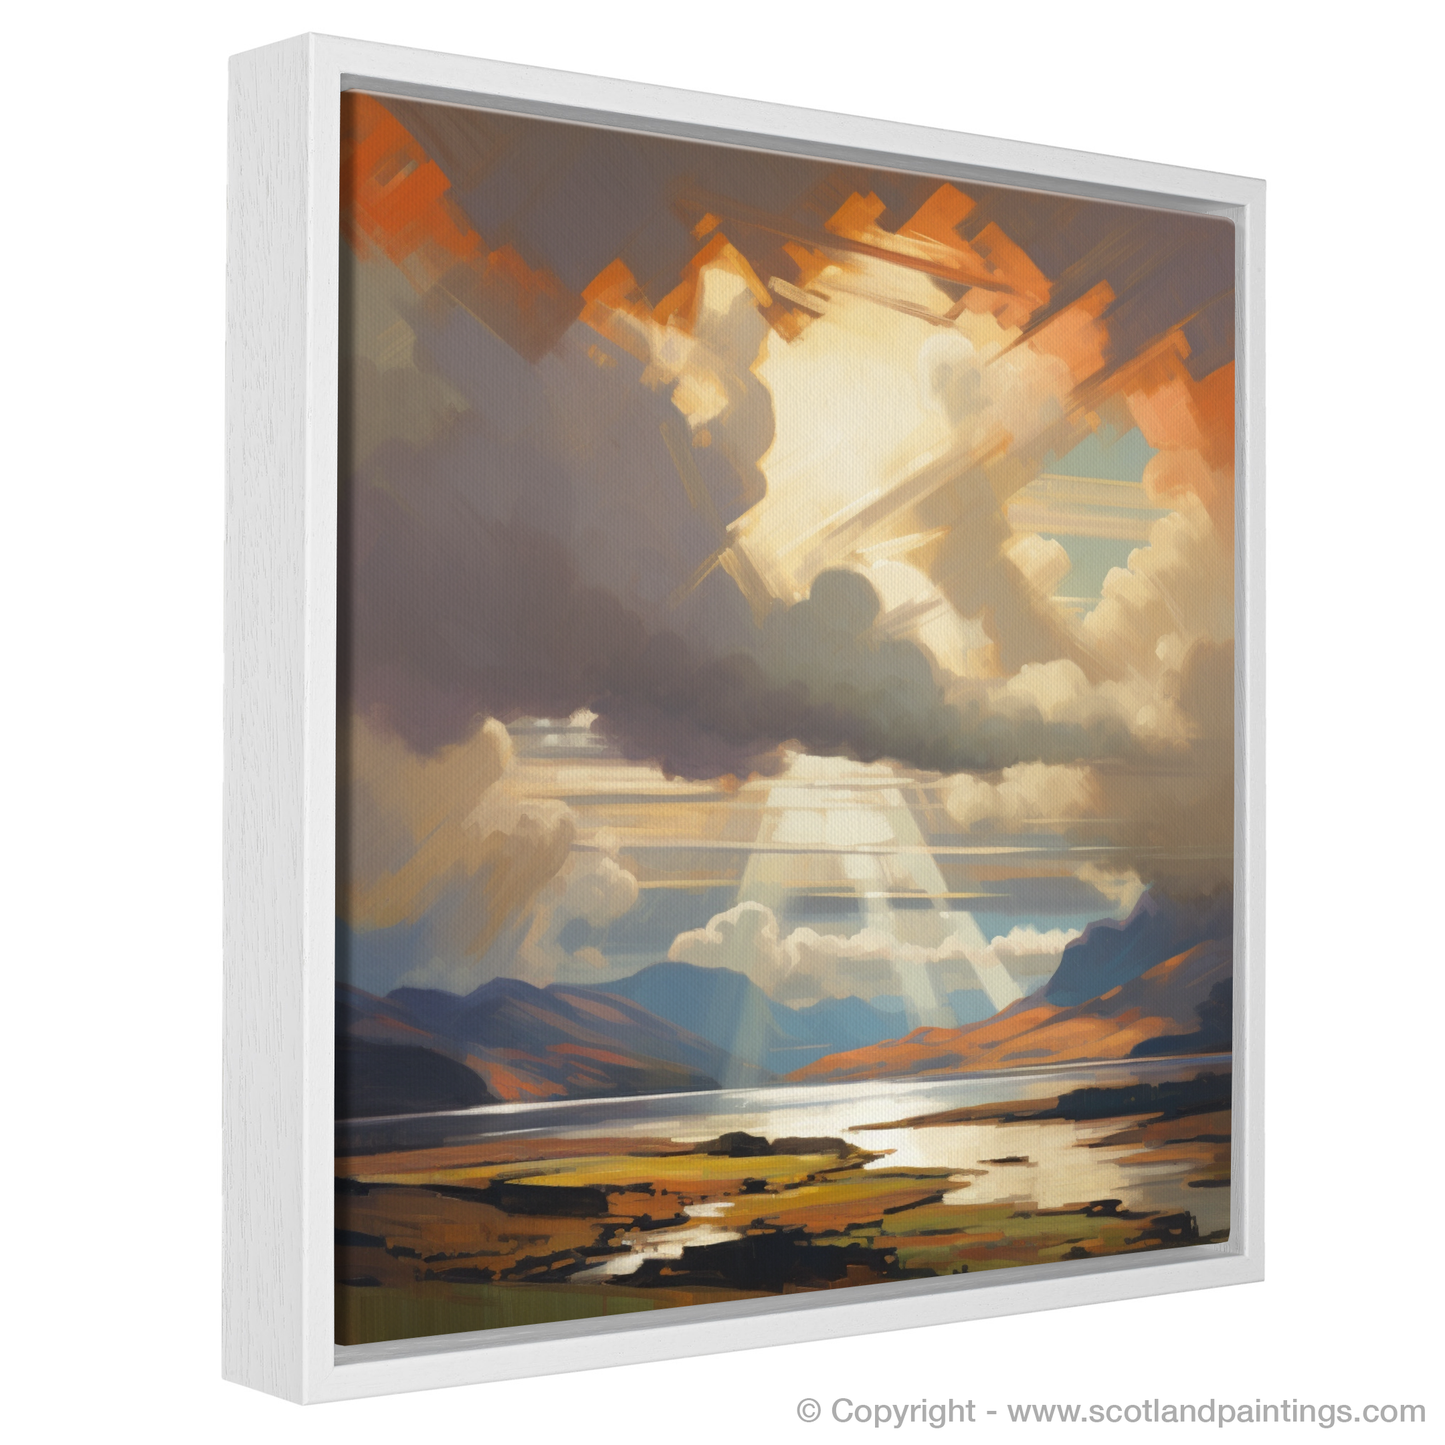 Painting and Art Print of Sun rays through clouds above Loch Lomond entitled "Sun Rays and Brooding Clouds: A Loch Lomond Spectacle".